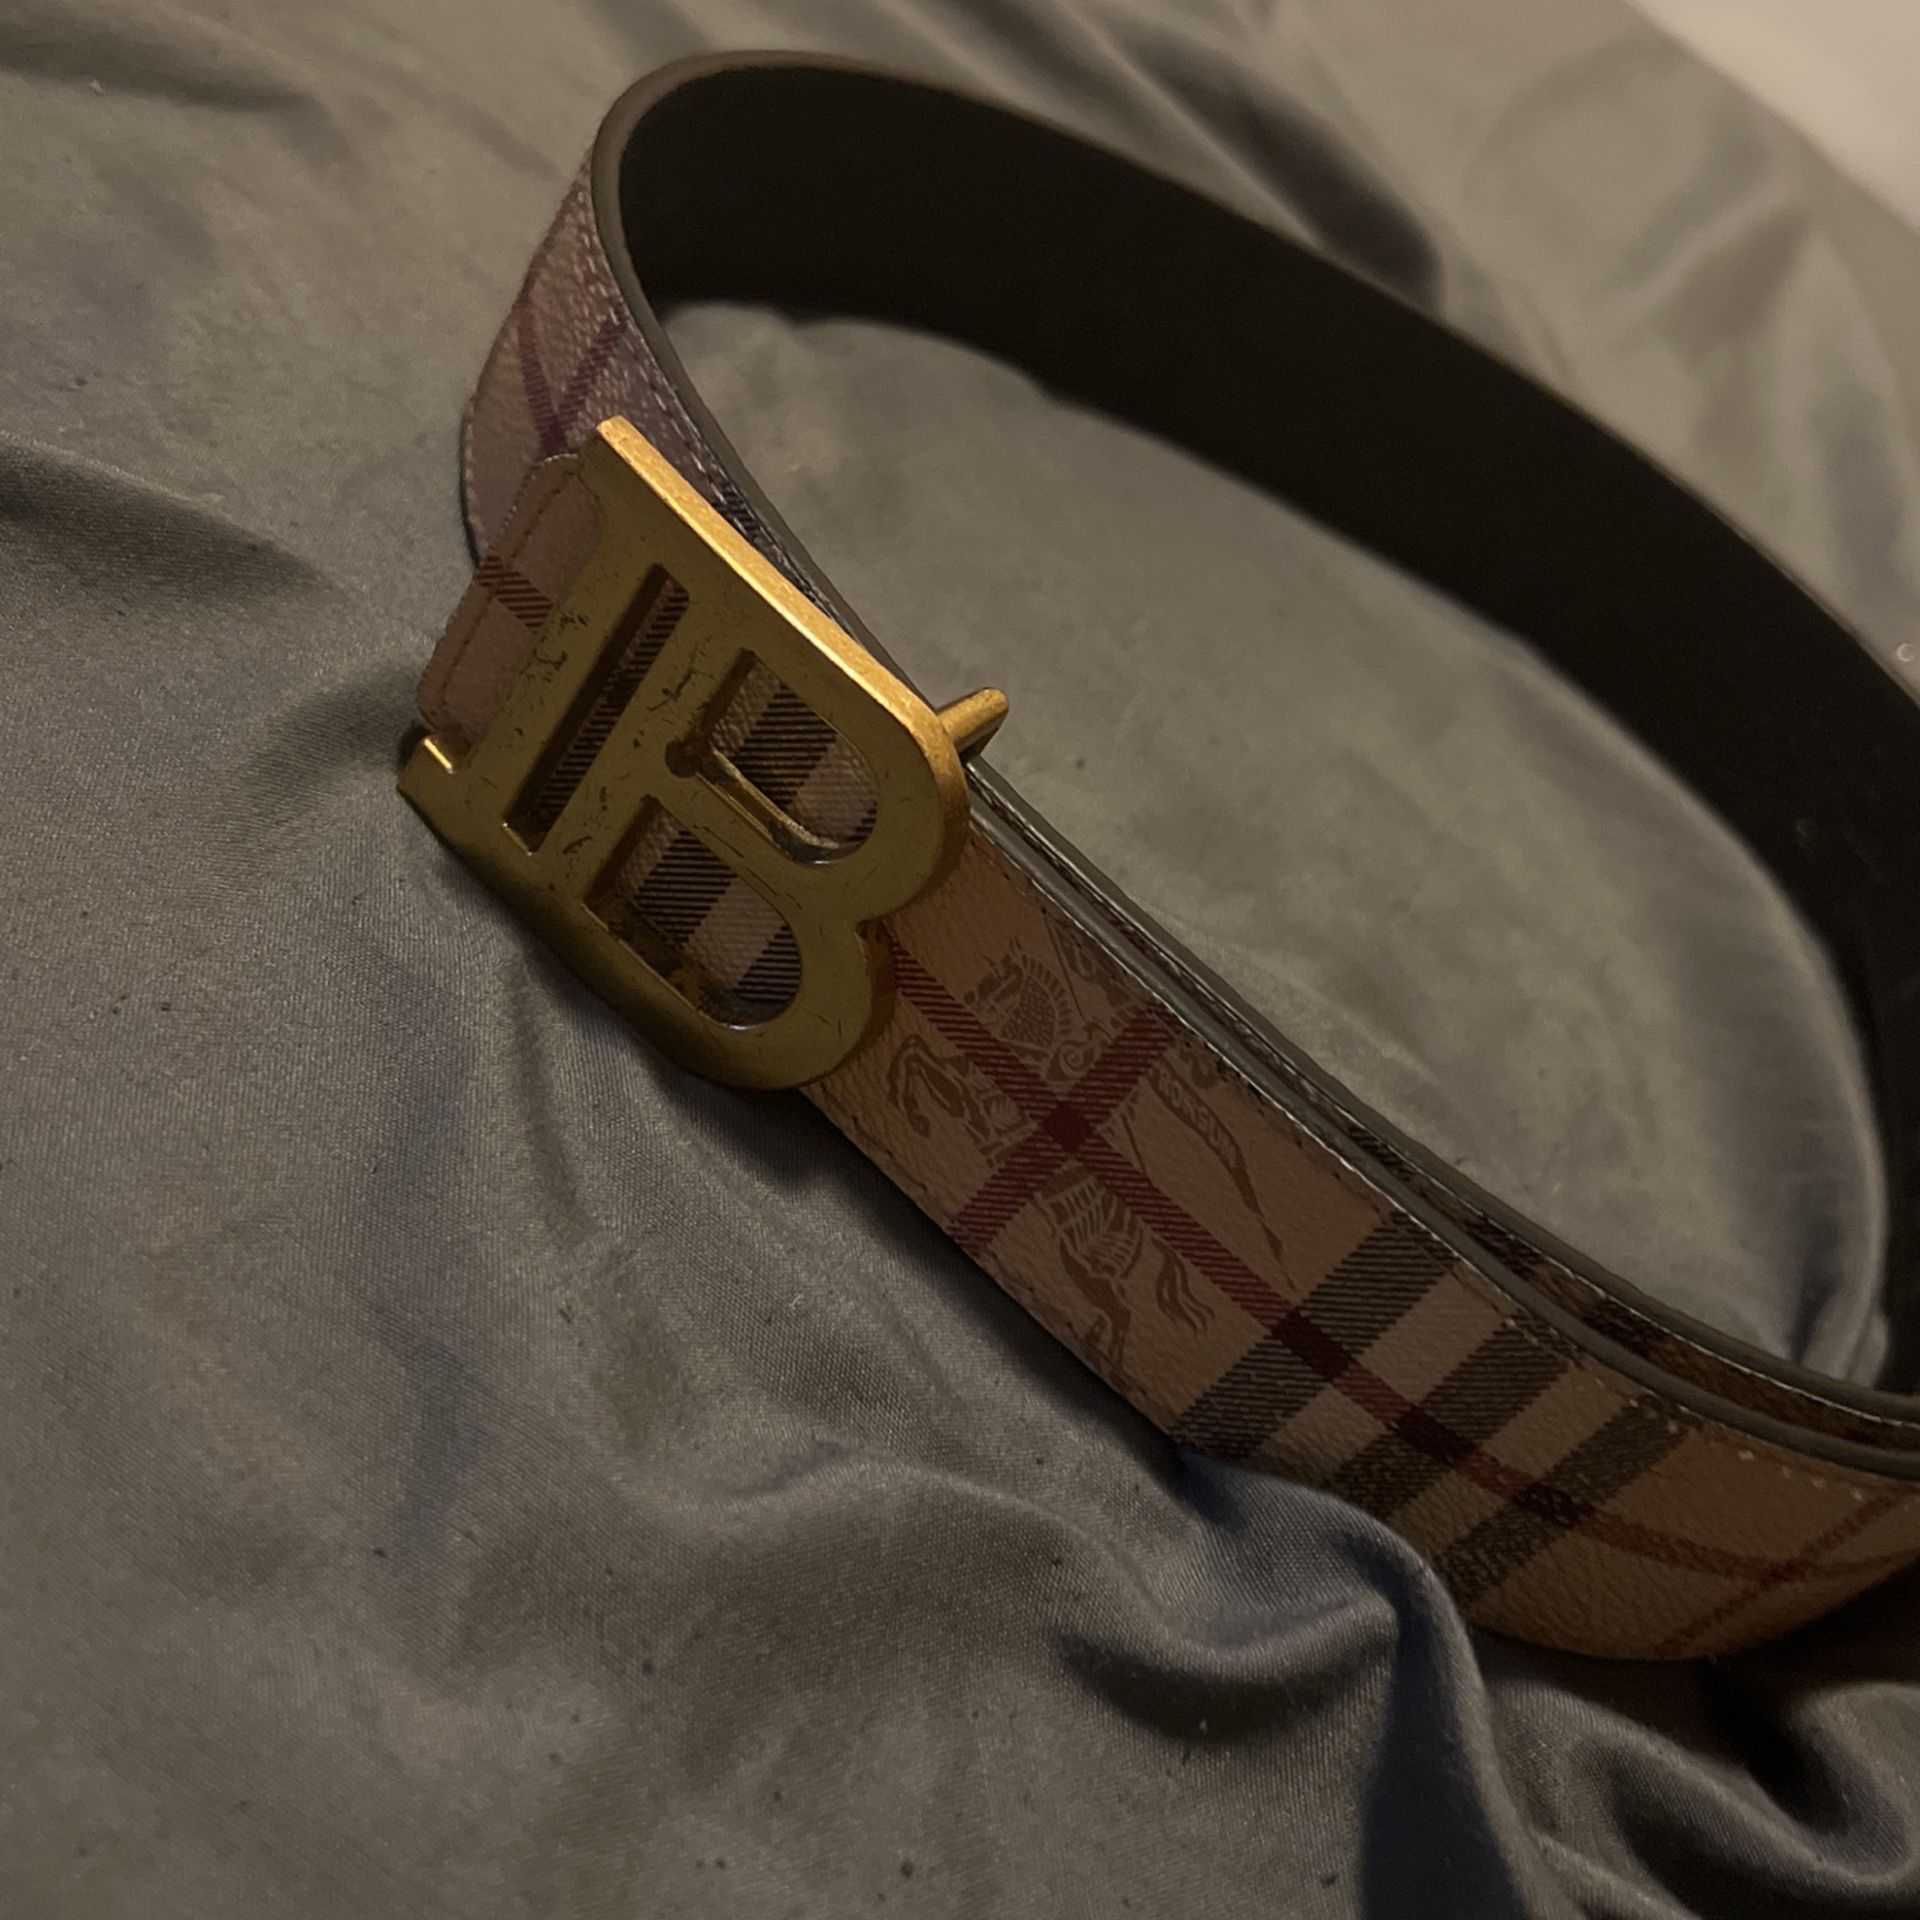 Burberry Belt for Sale in Miami, FL - OfferUp